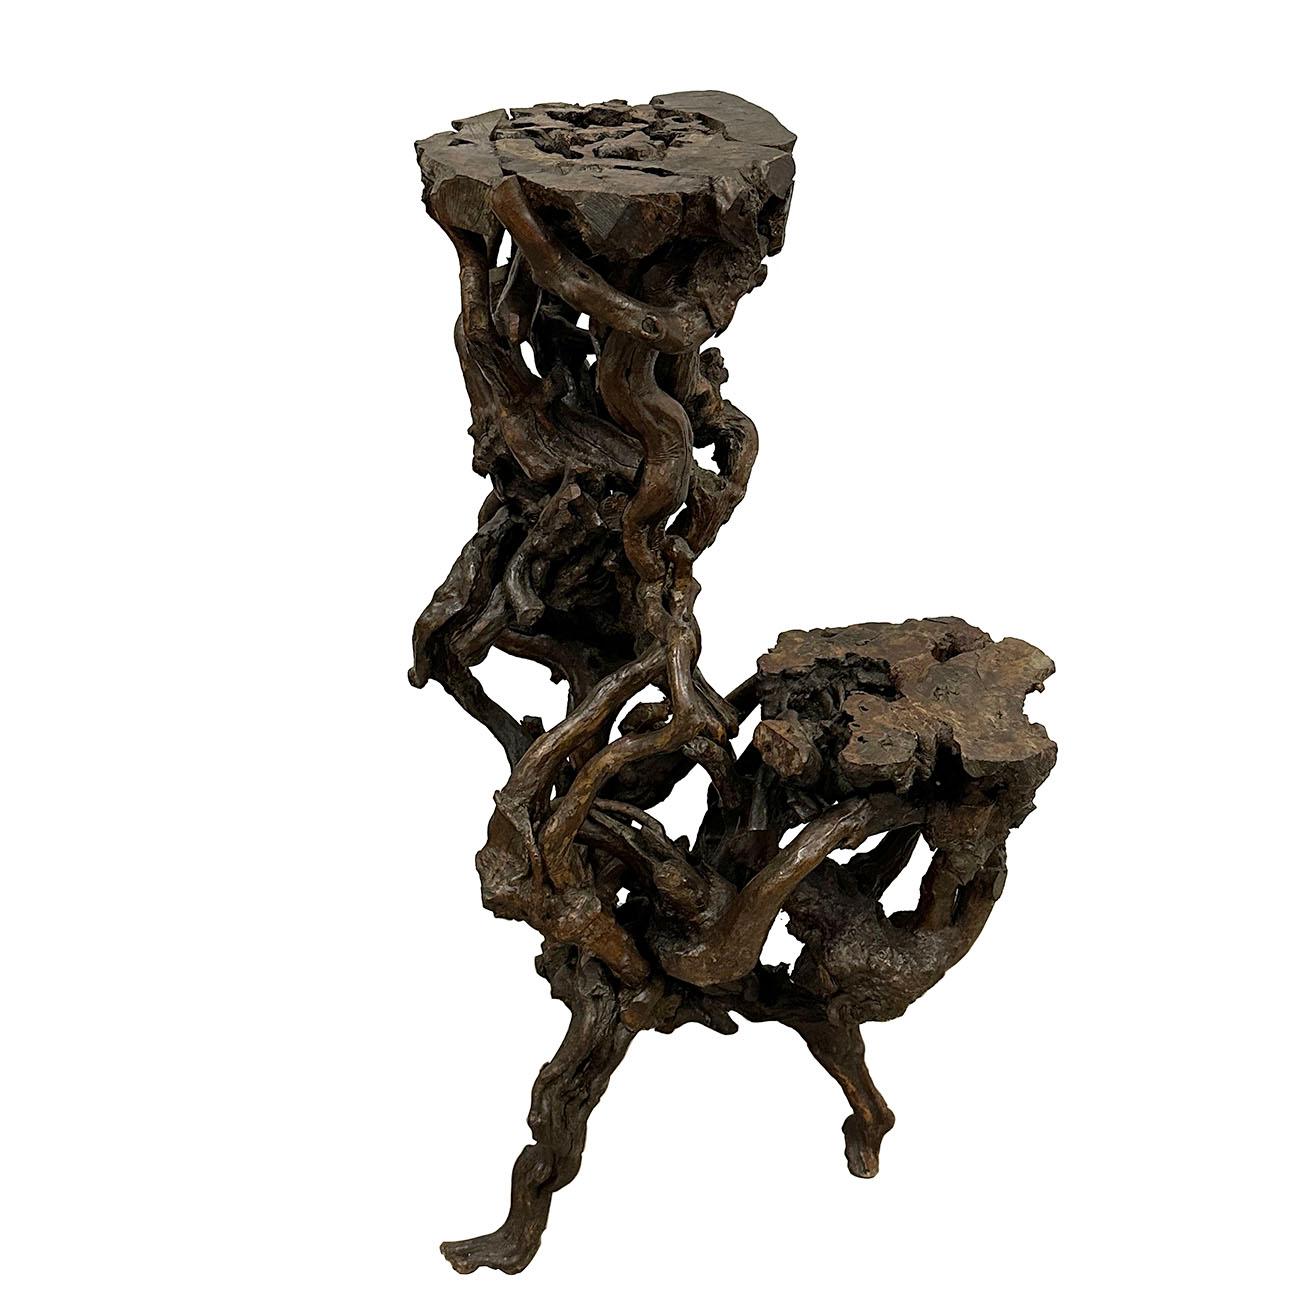 A vintage Chinese sculptural pedestal from the Mid-20th Century, made from the tree root with natural finish. Created in China during the Mid-century period, this pedestal attracts our immediate attention with its intricate lines and unique design -